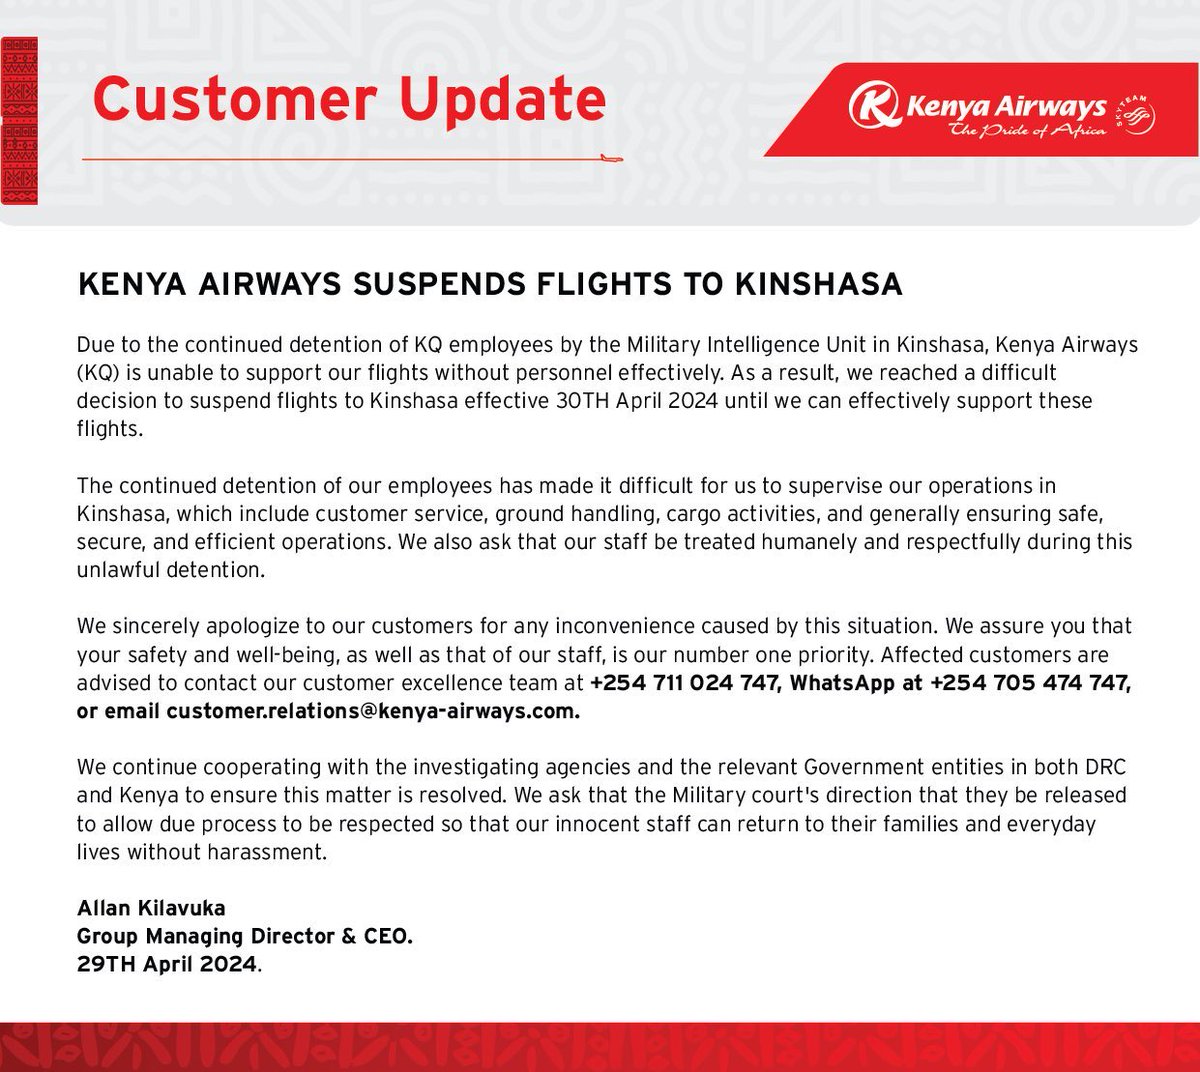 🌐 Kenya Airways has suspended flights to Kinshasa, DR Congo due to the detention of two airline staff members by the Congolese military. The military suspects the staff of being involved in smuggling money to fund rebel groups.